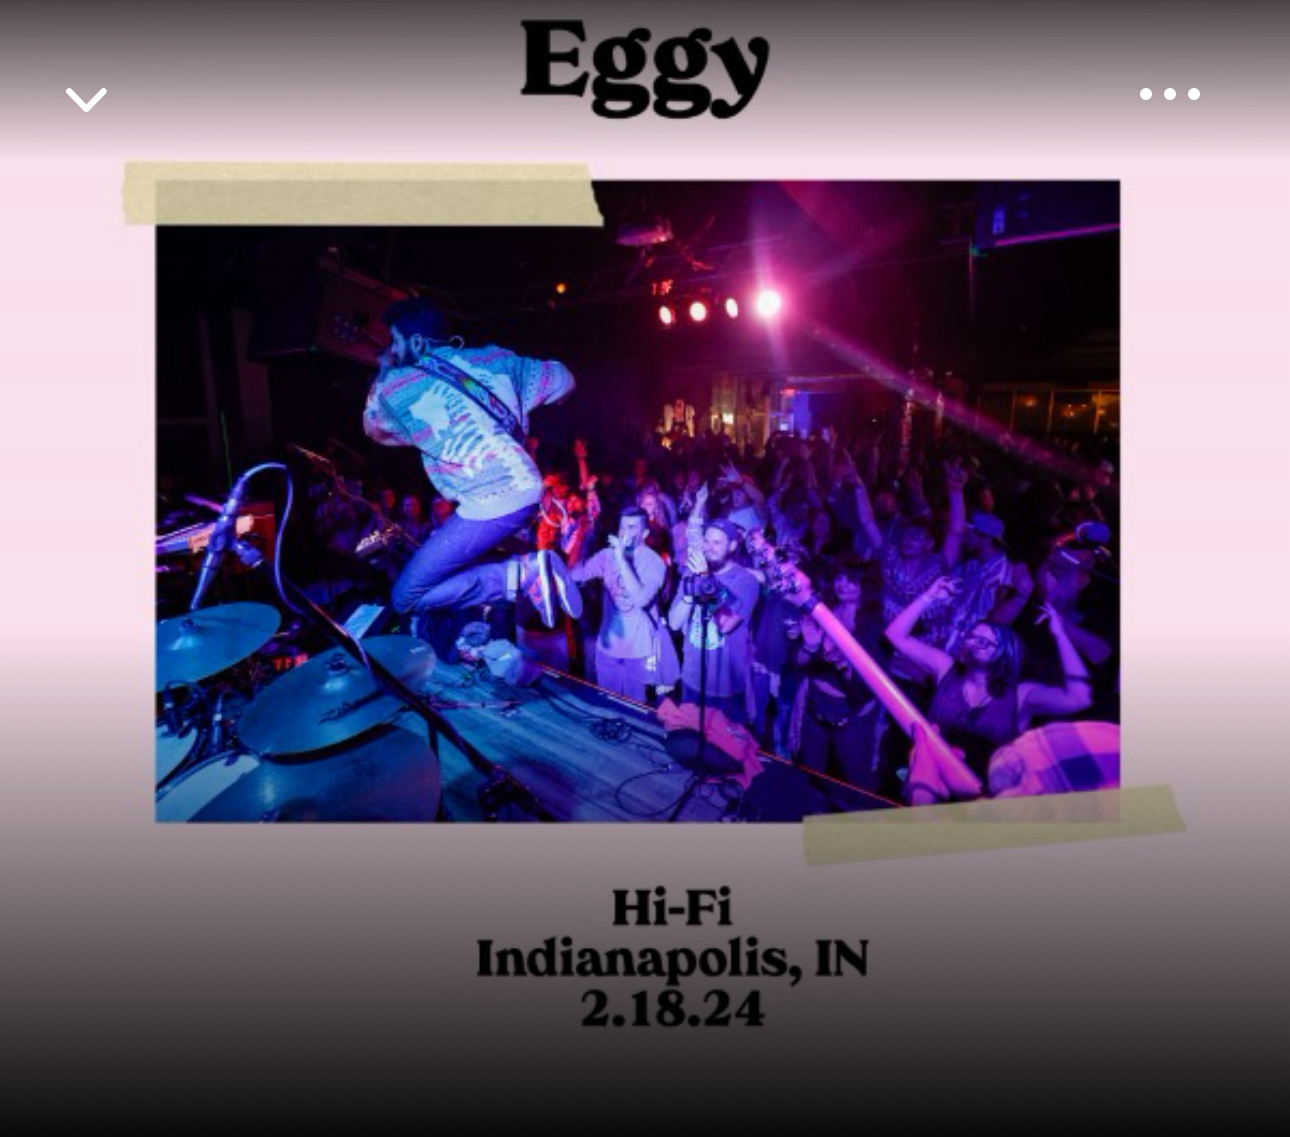 A performer is jumping energetically on stage in front of an excited crowd at a concert venue called Hi-Fi in Indianapolis, IN, with the date 2.18.24 indicated. The band’s name, “Eggy,” is displayed